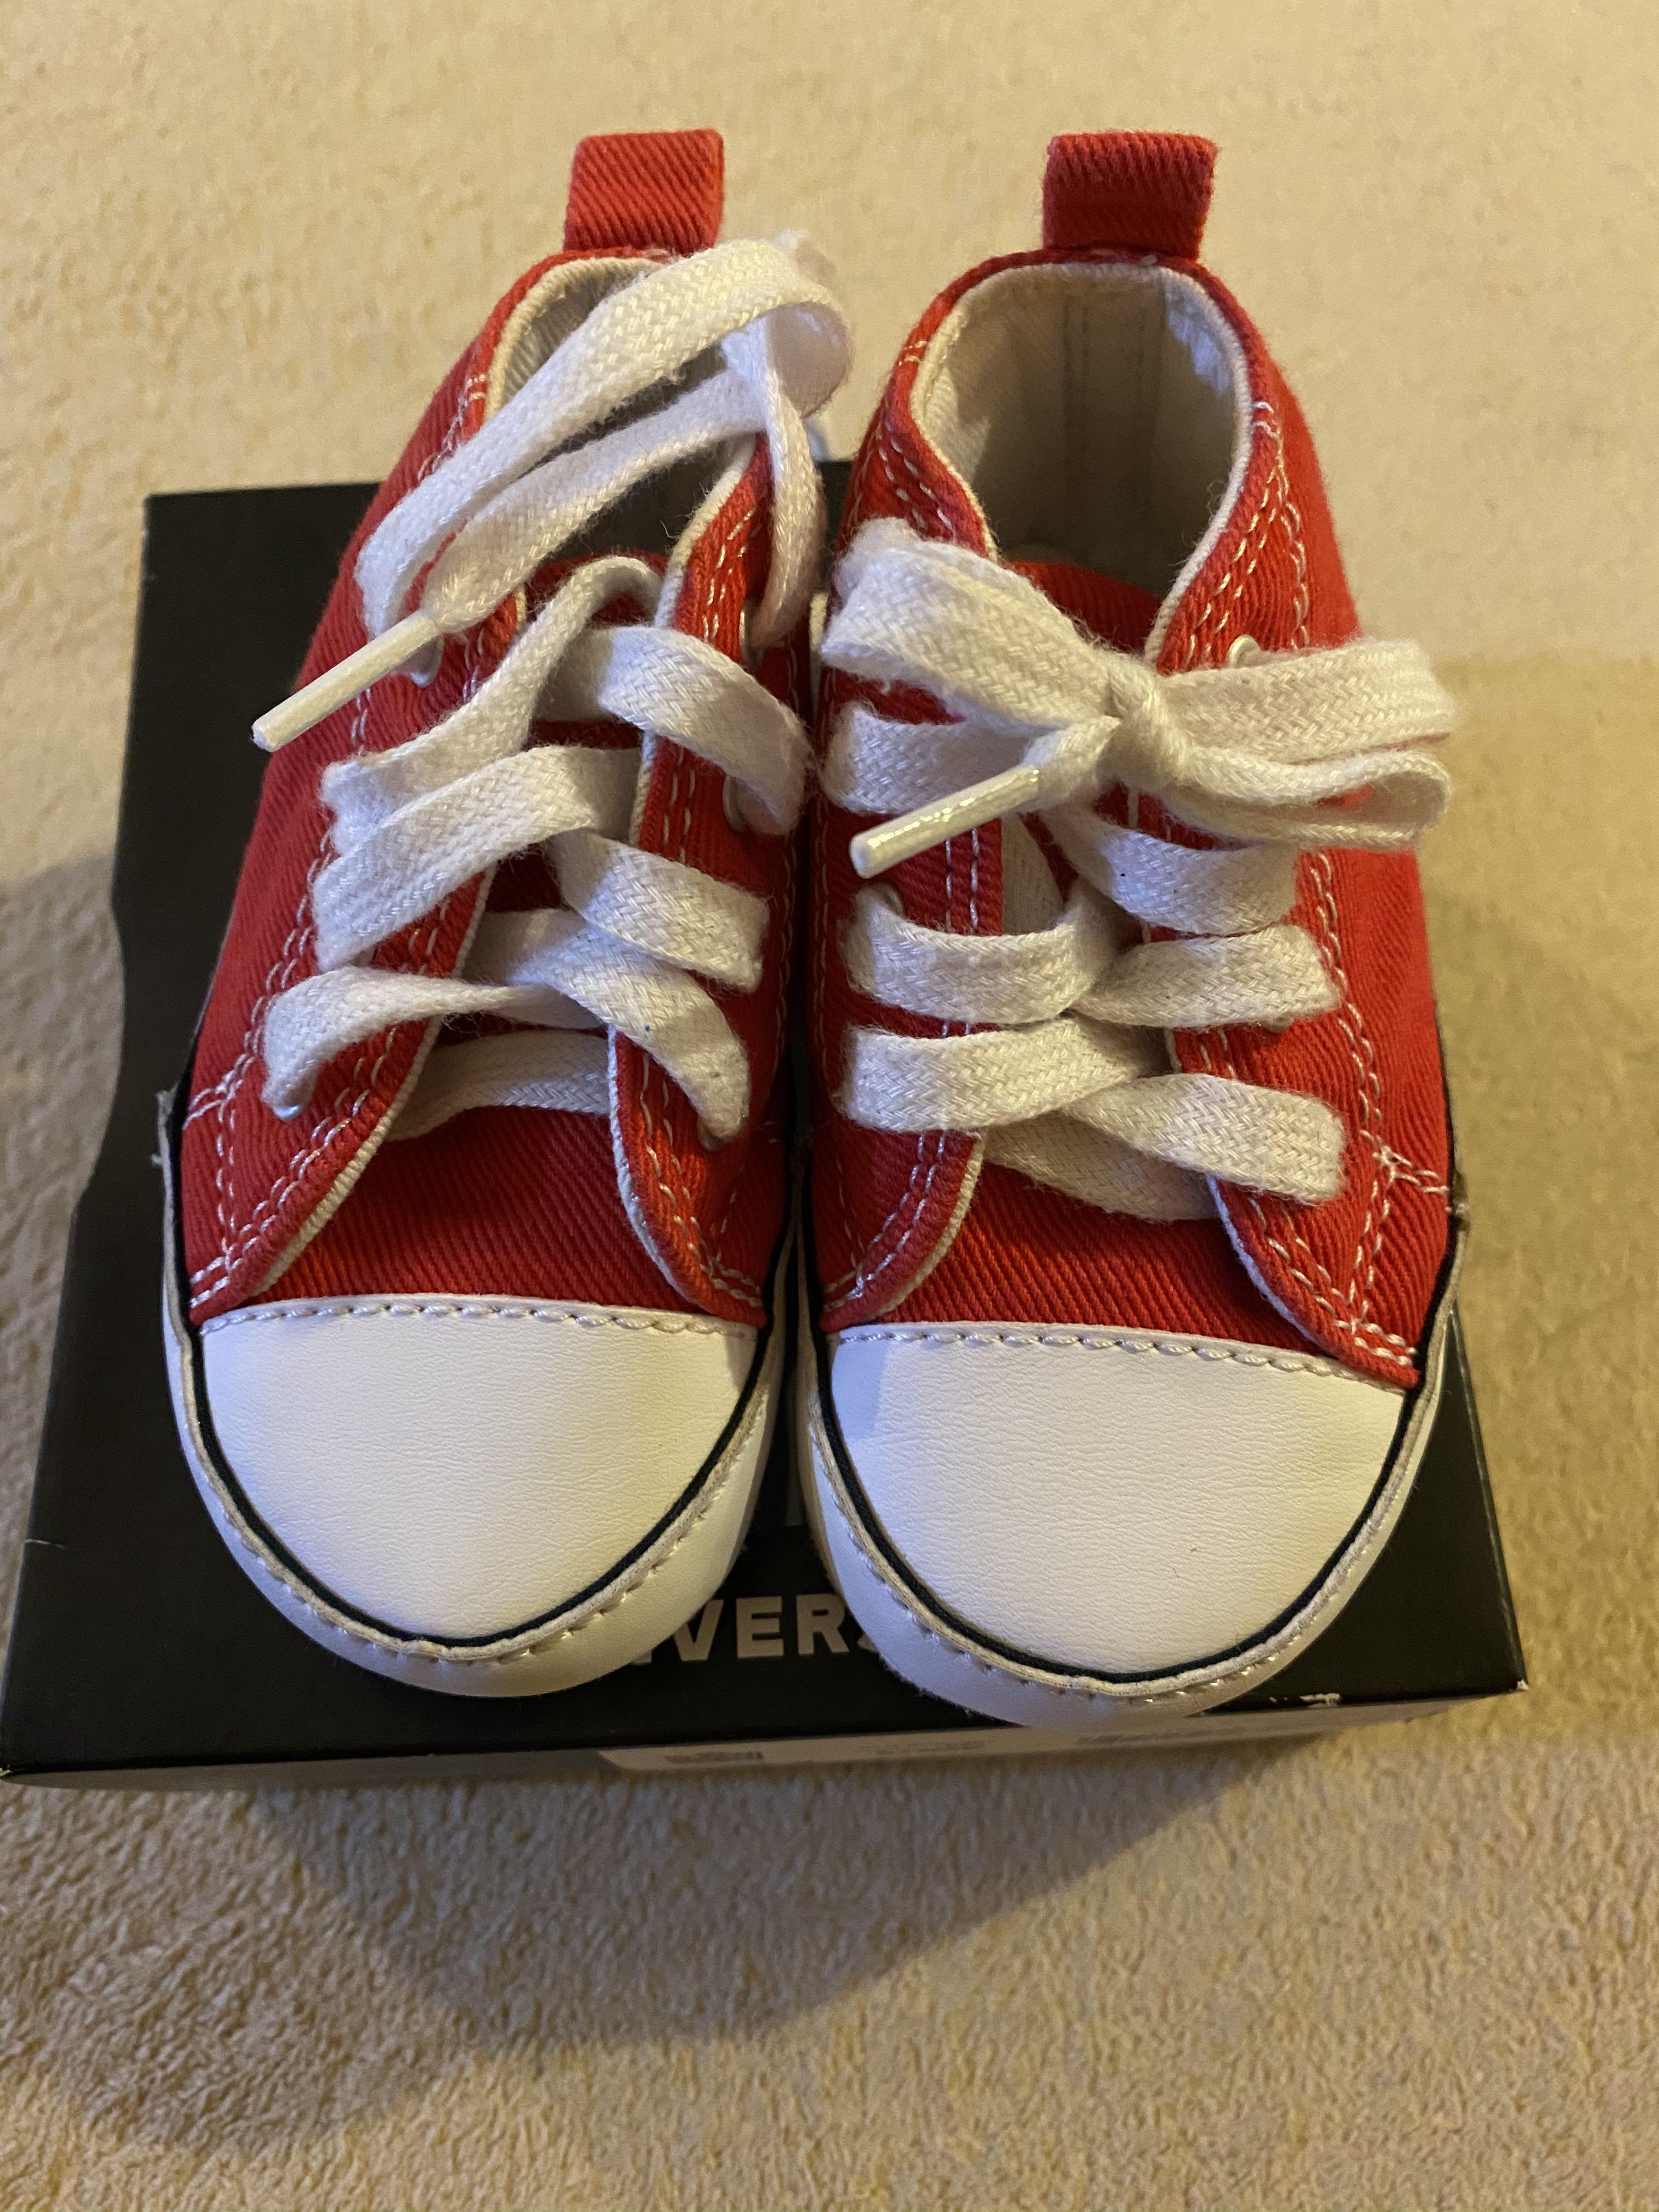 converse baby shoes size 3